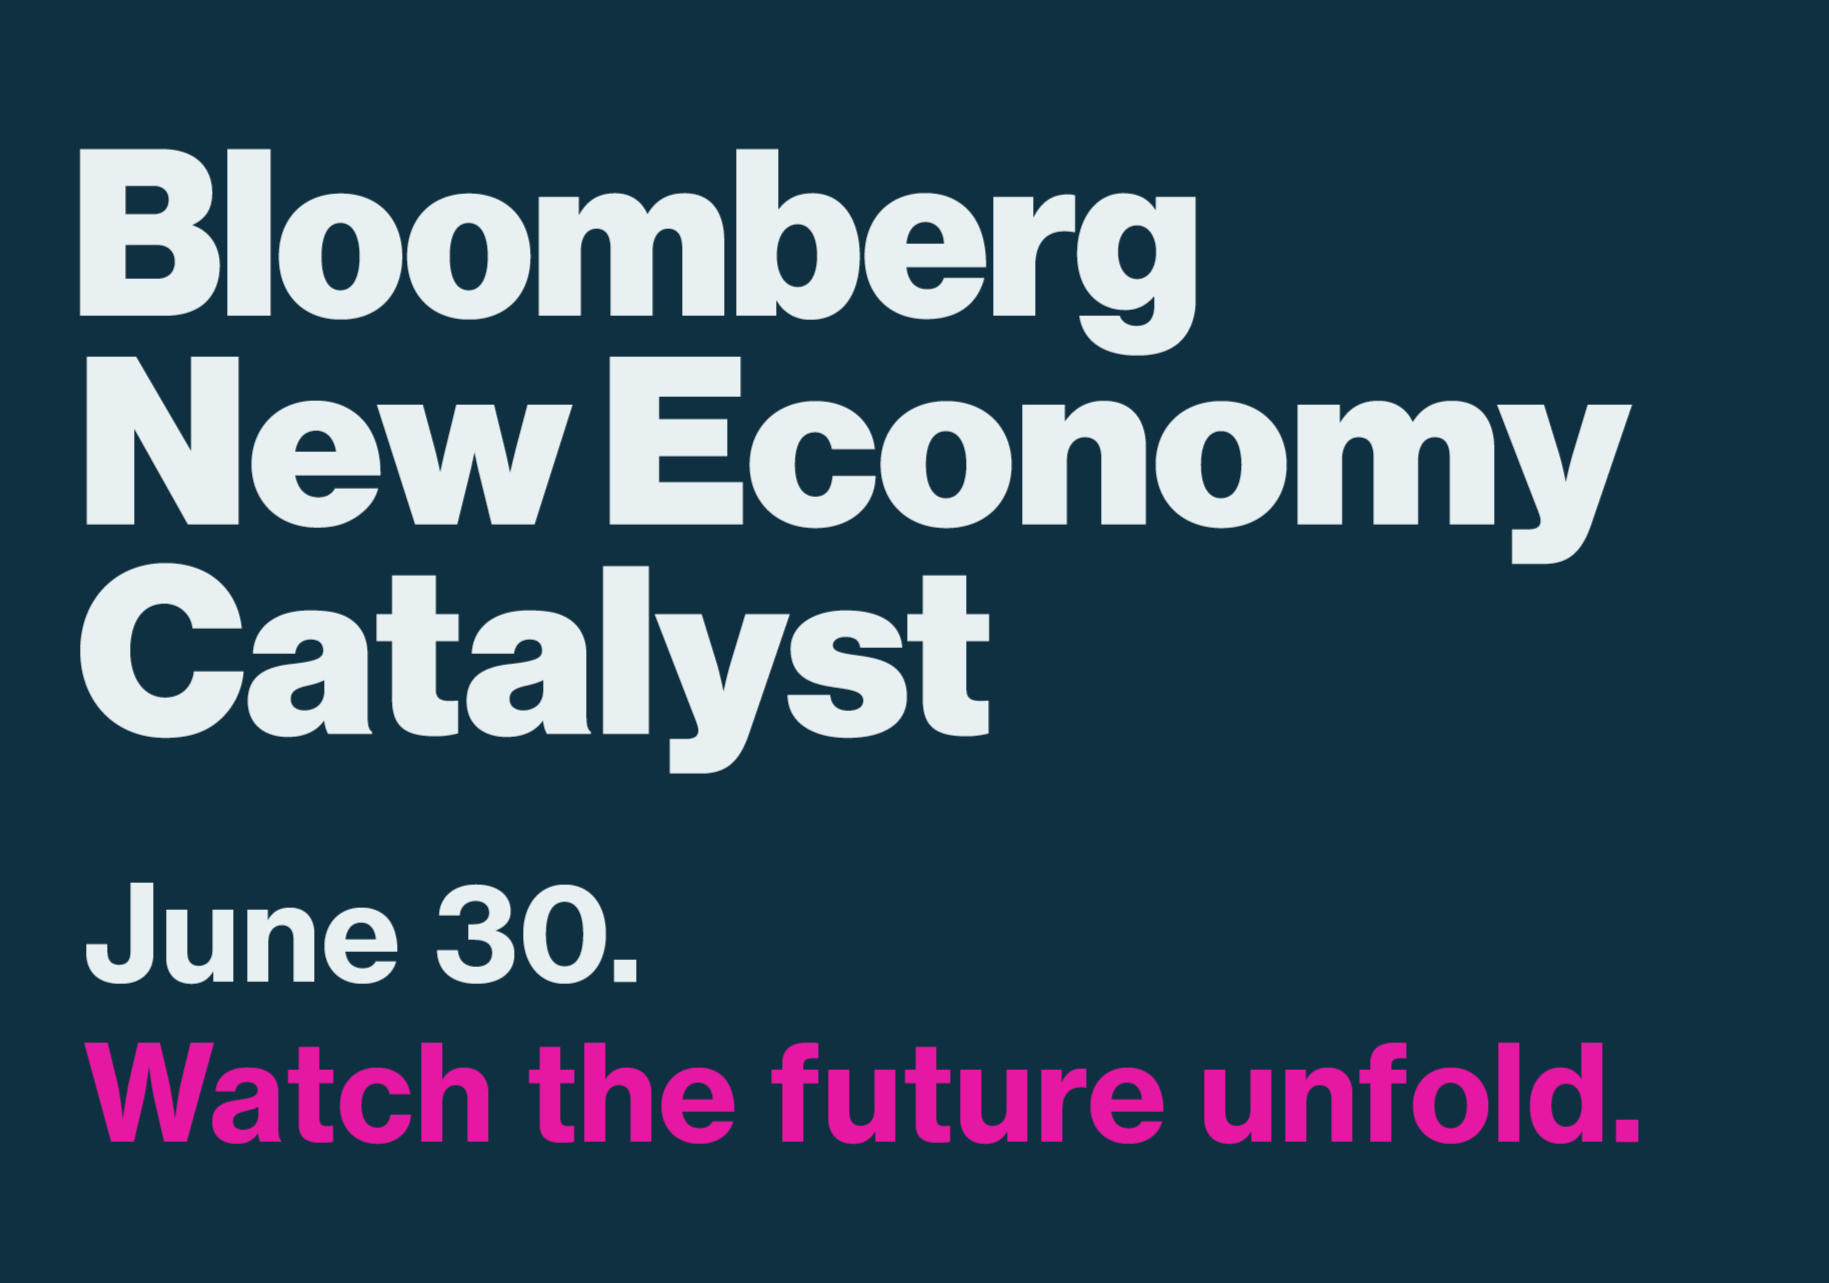 XAG Shared its Agri-tech Blueprint on Bloomberg New Economy Catalysts Media Roundtable 